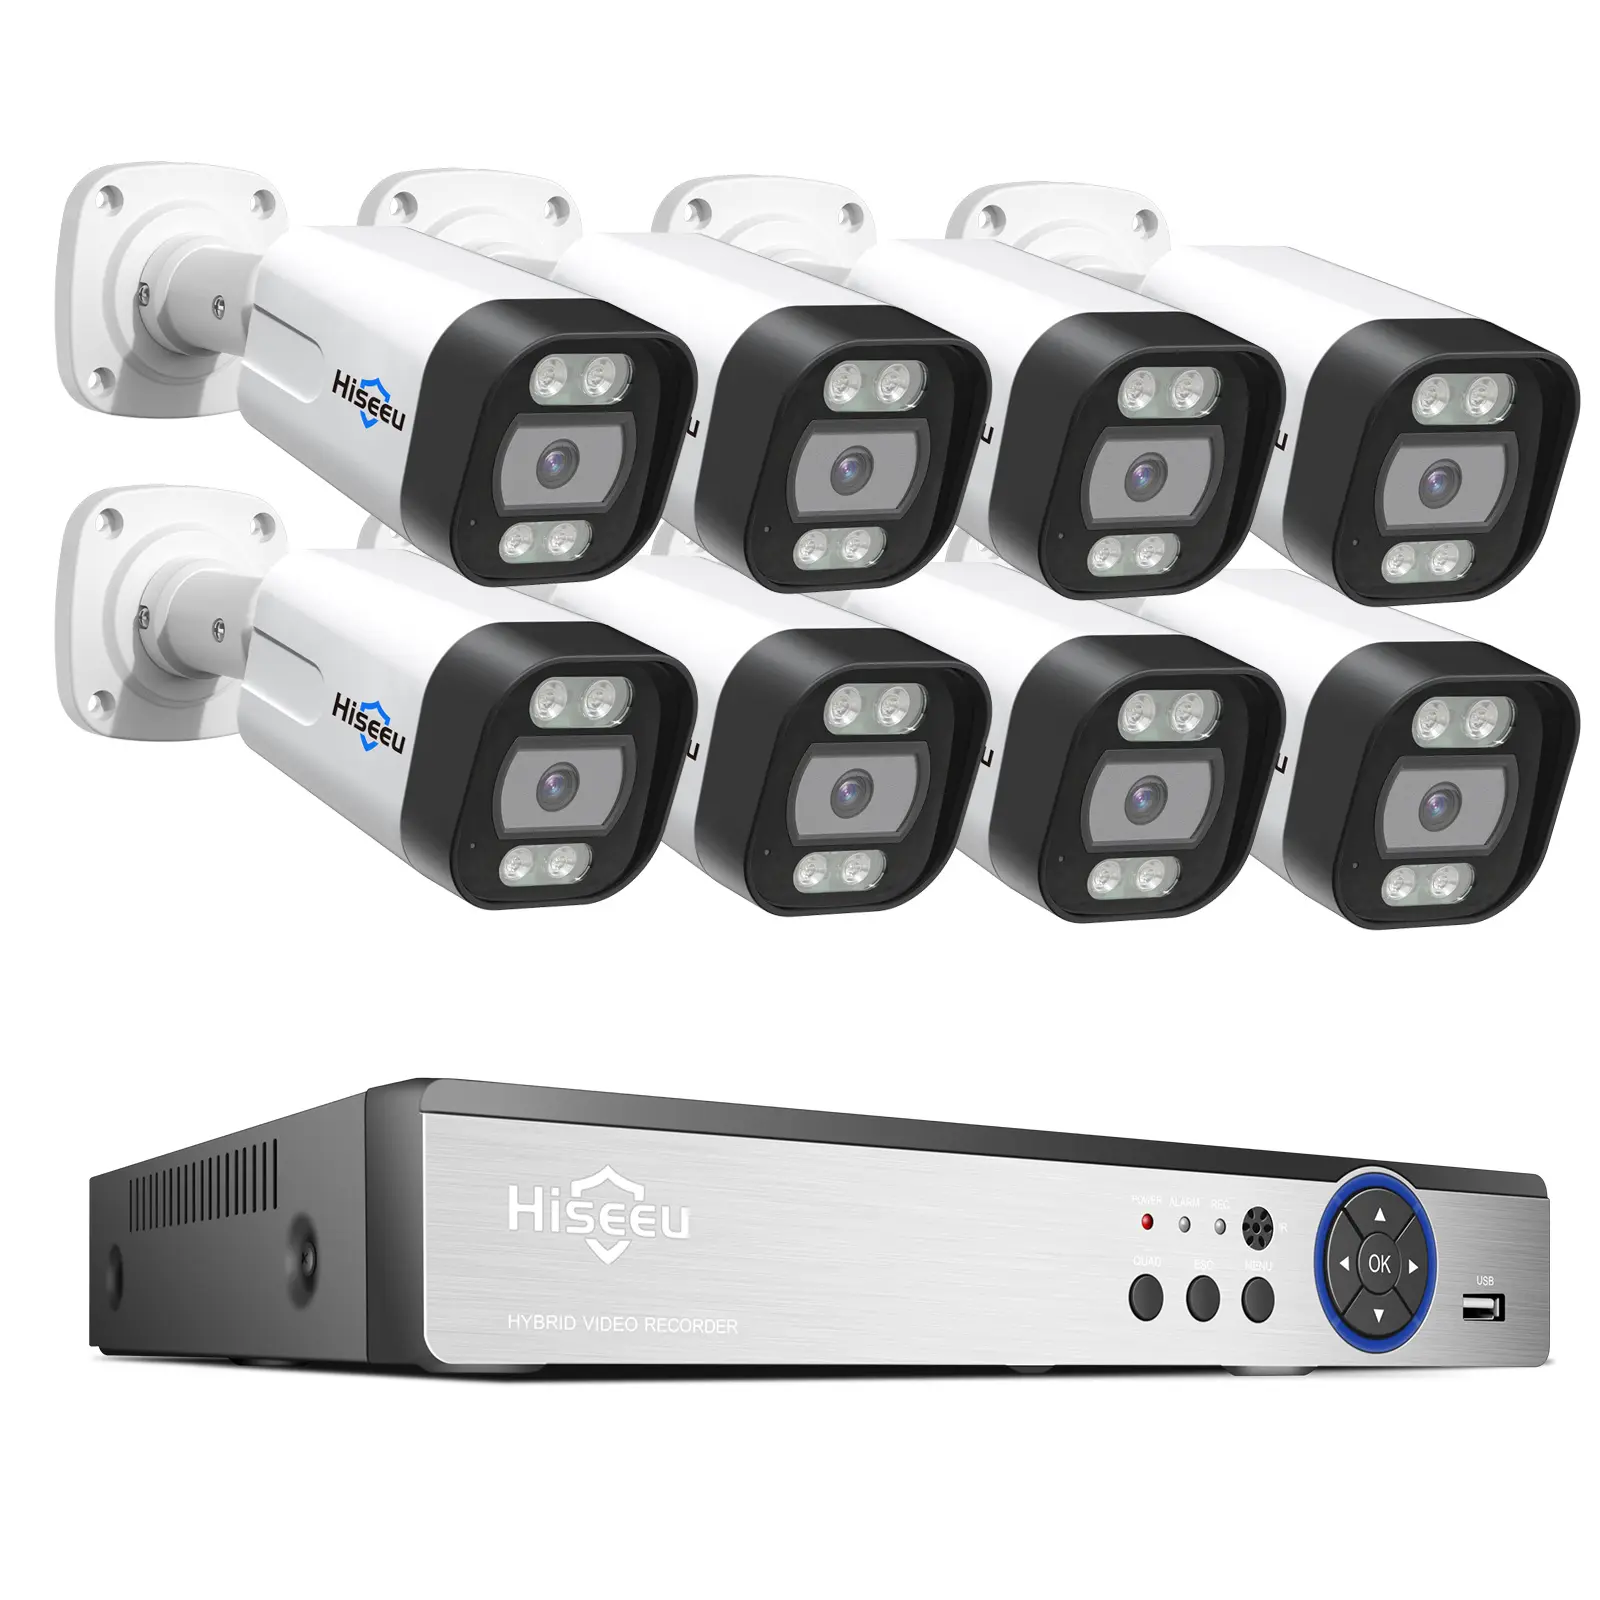 Hiseeu 4K 8channel 8mp Security Camera System Outdoor Home Poe Nvr Kit Cctv Ip Cameras Surveillance Security Camera System